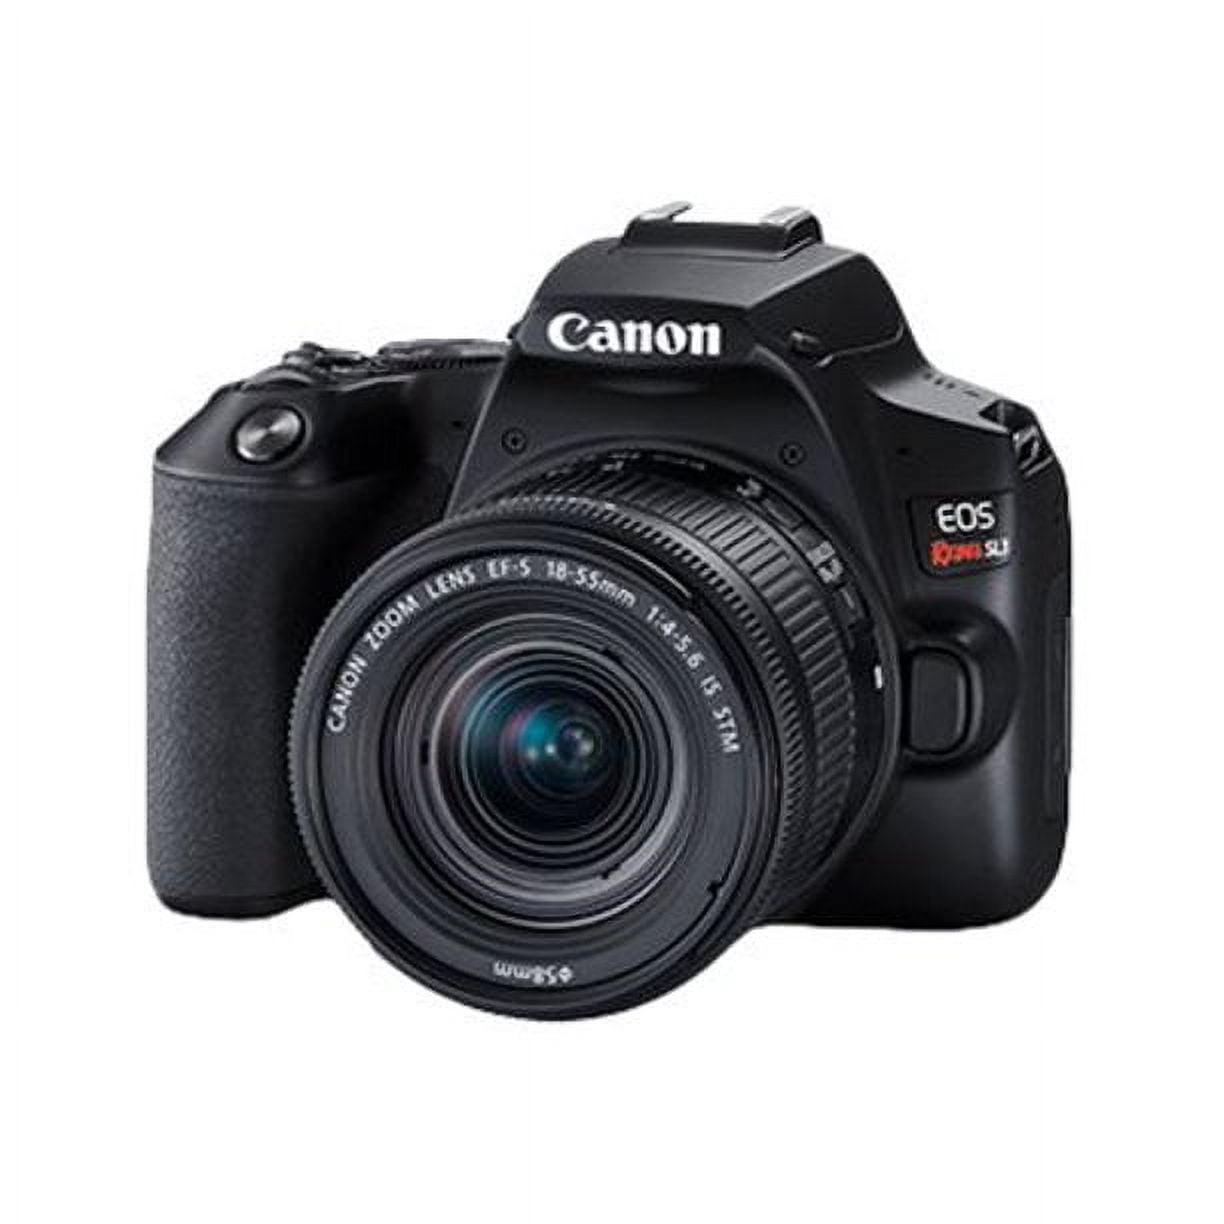 Canon DSLR Camera [EOS 90D] with Built-in Wi-Fi, Bluetooth, DIGIC 8 Image  Processor, 4K Video, Dual Pixel CMOS AF, and 3.0 Inch Vari-Angle Touch LCD